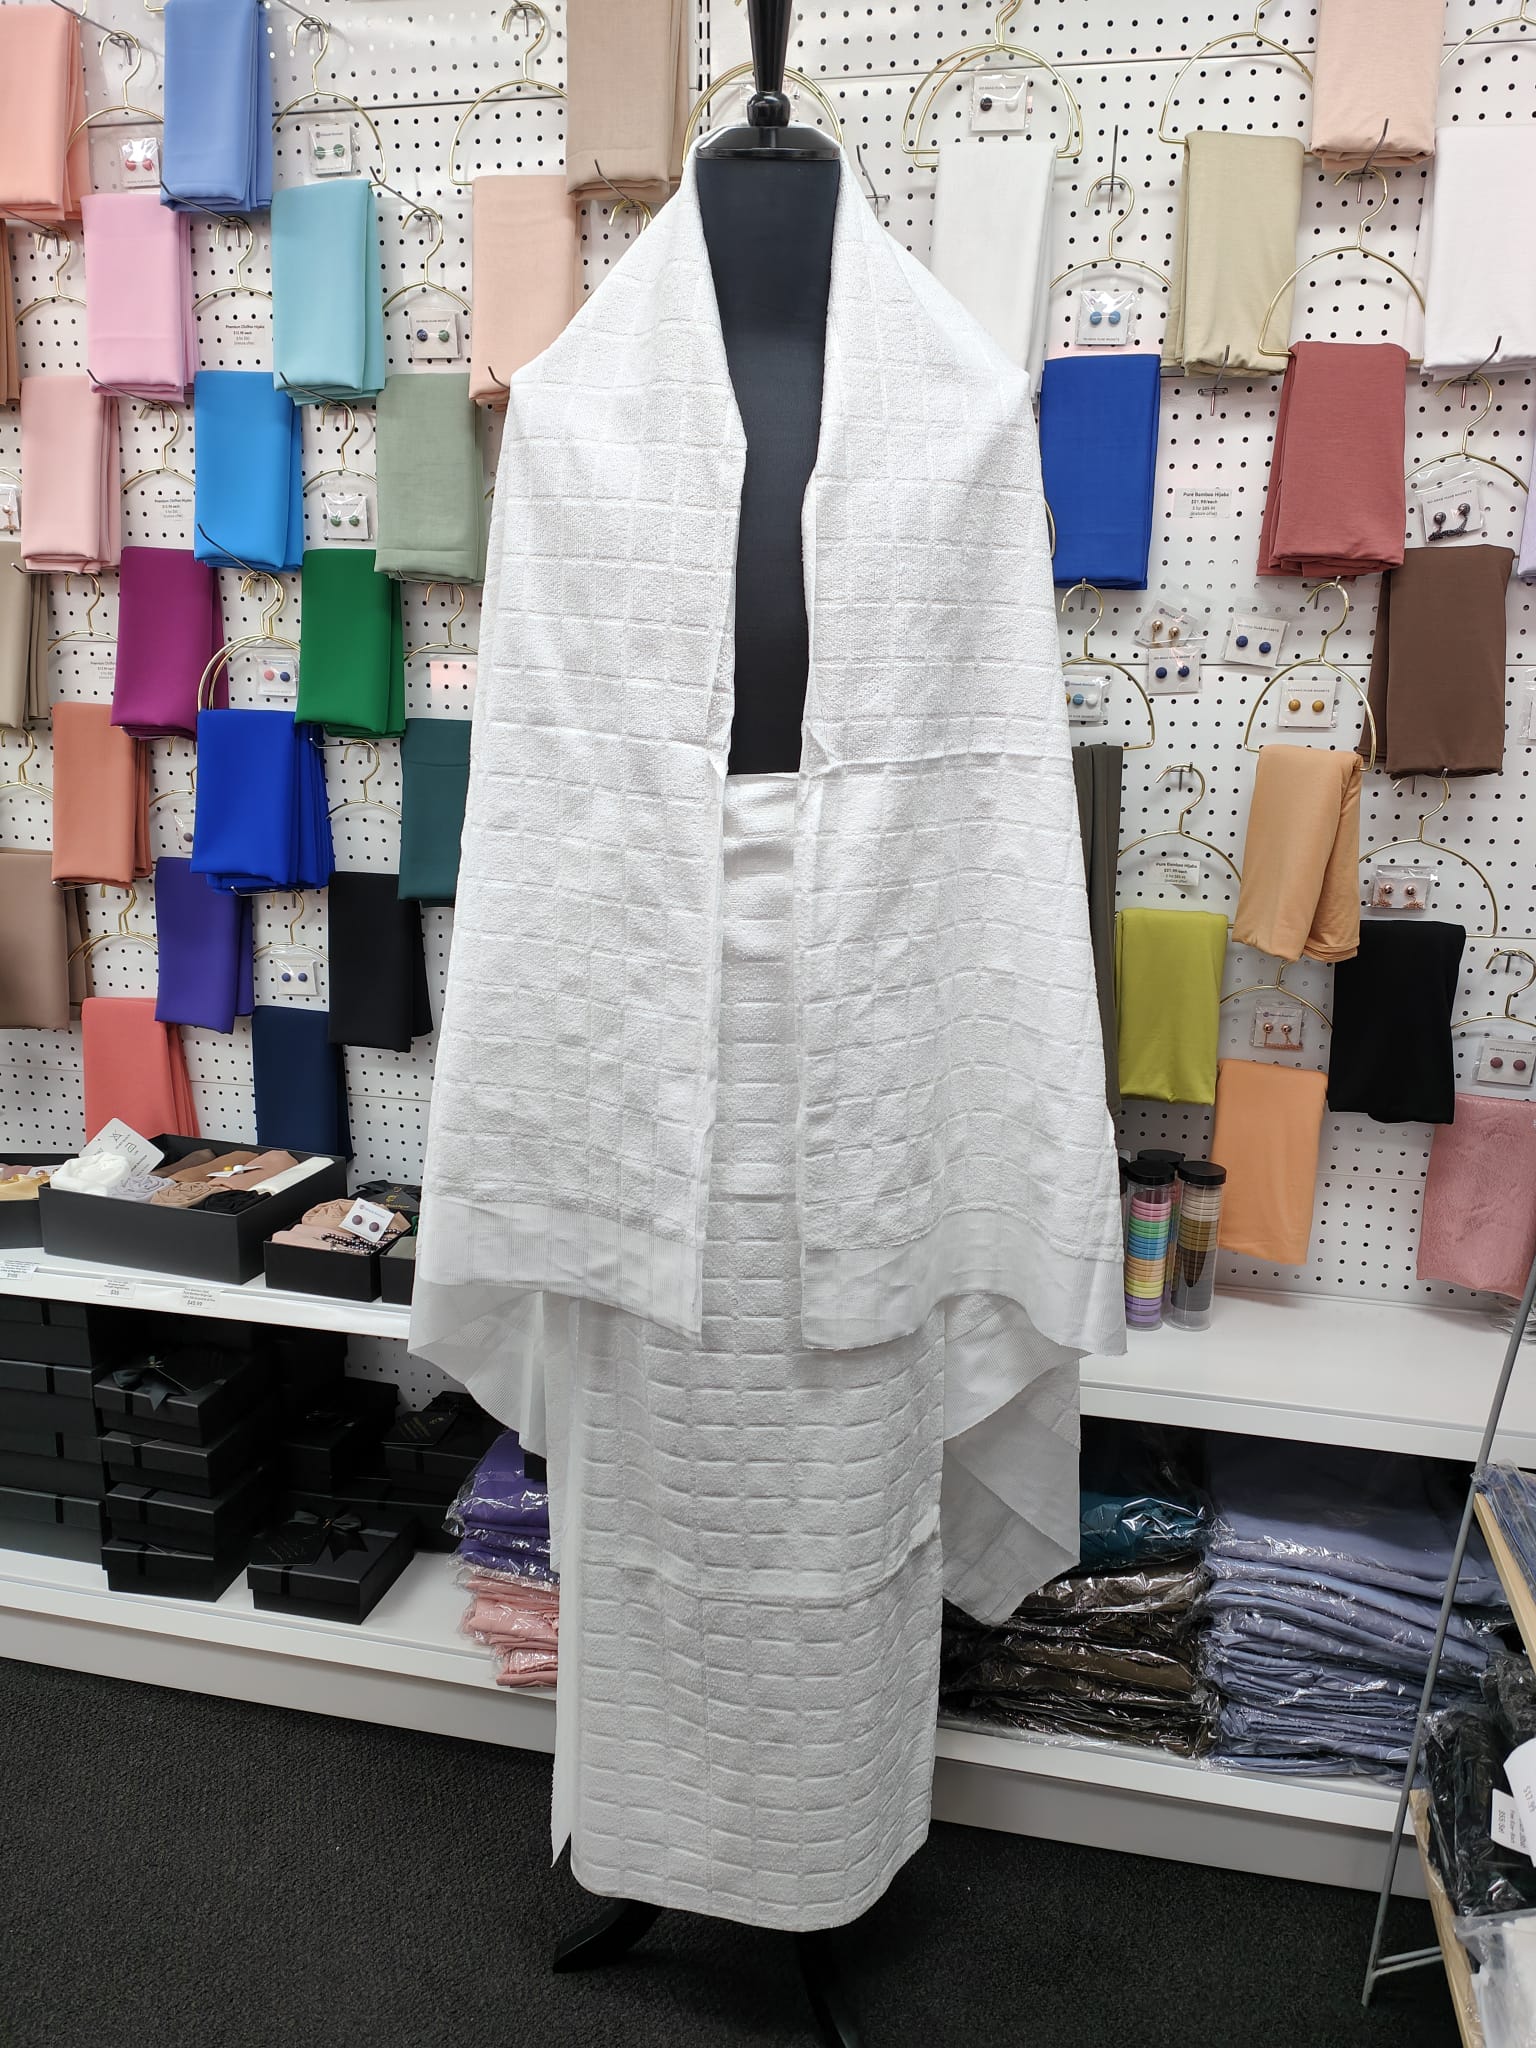 Discover the pinnacle of comfort and tradition with our Ihram for Hajj and Umrah at Hikmah Boutique. Immerse yourself in the divine journey with the best quality, optimal dimensions, and timeless elegance. Explore our exclusive Ihram for Hajj and Umrah, your pilgrimage, our priority at Hikmah Boutique.